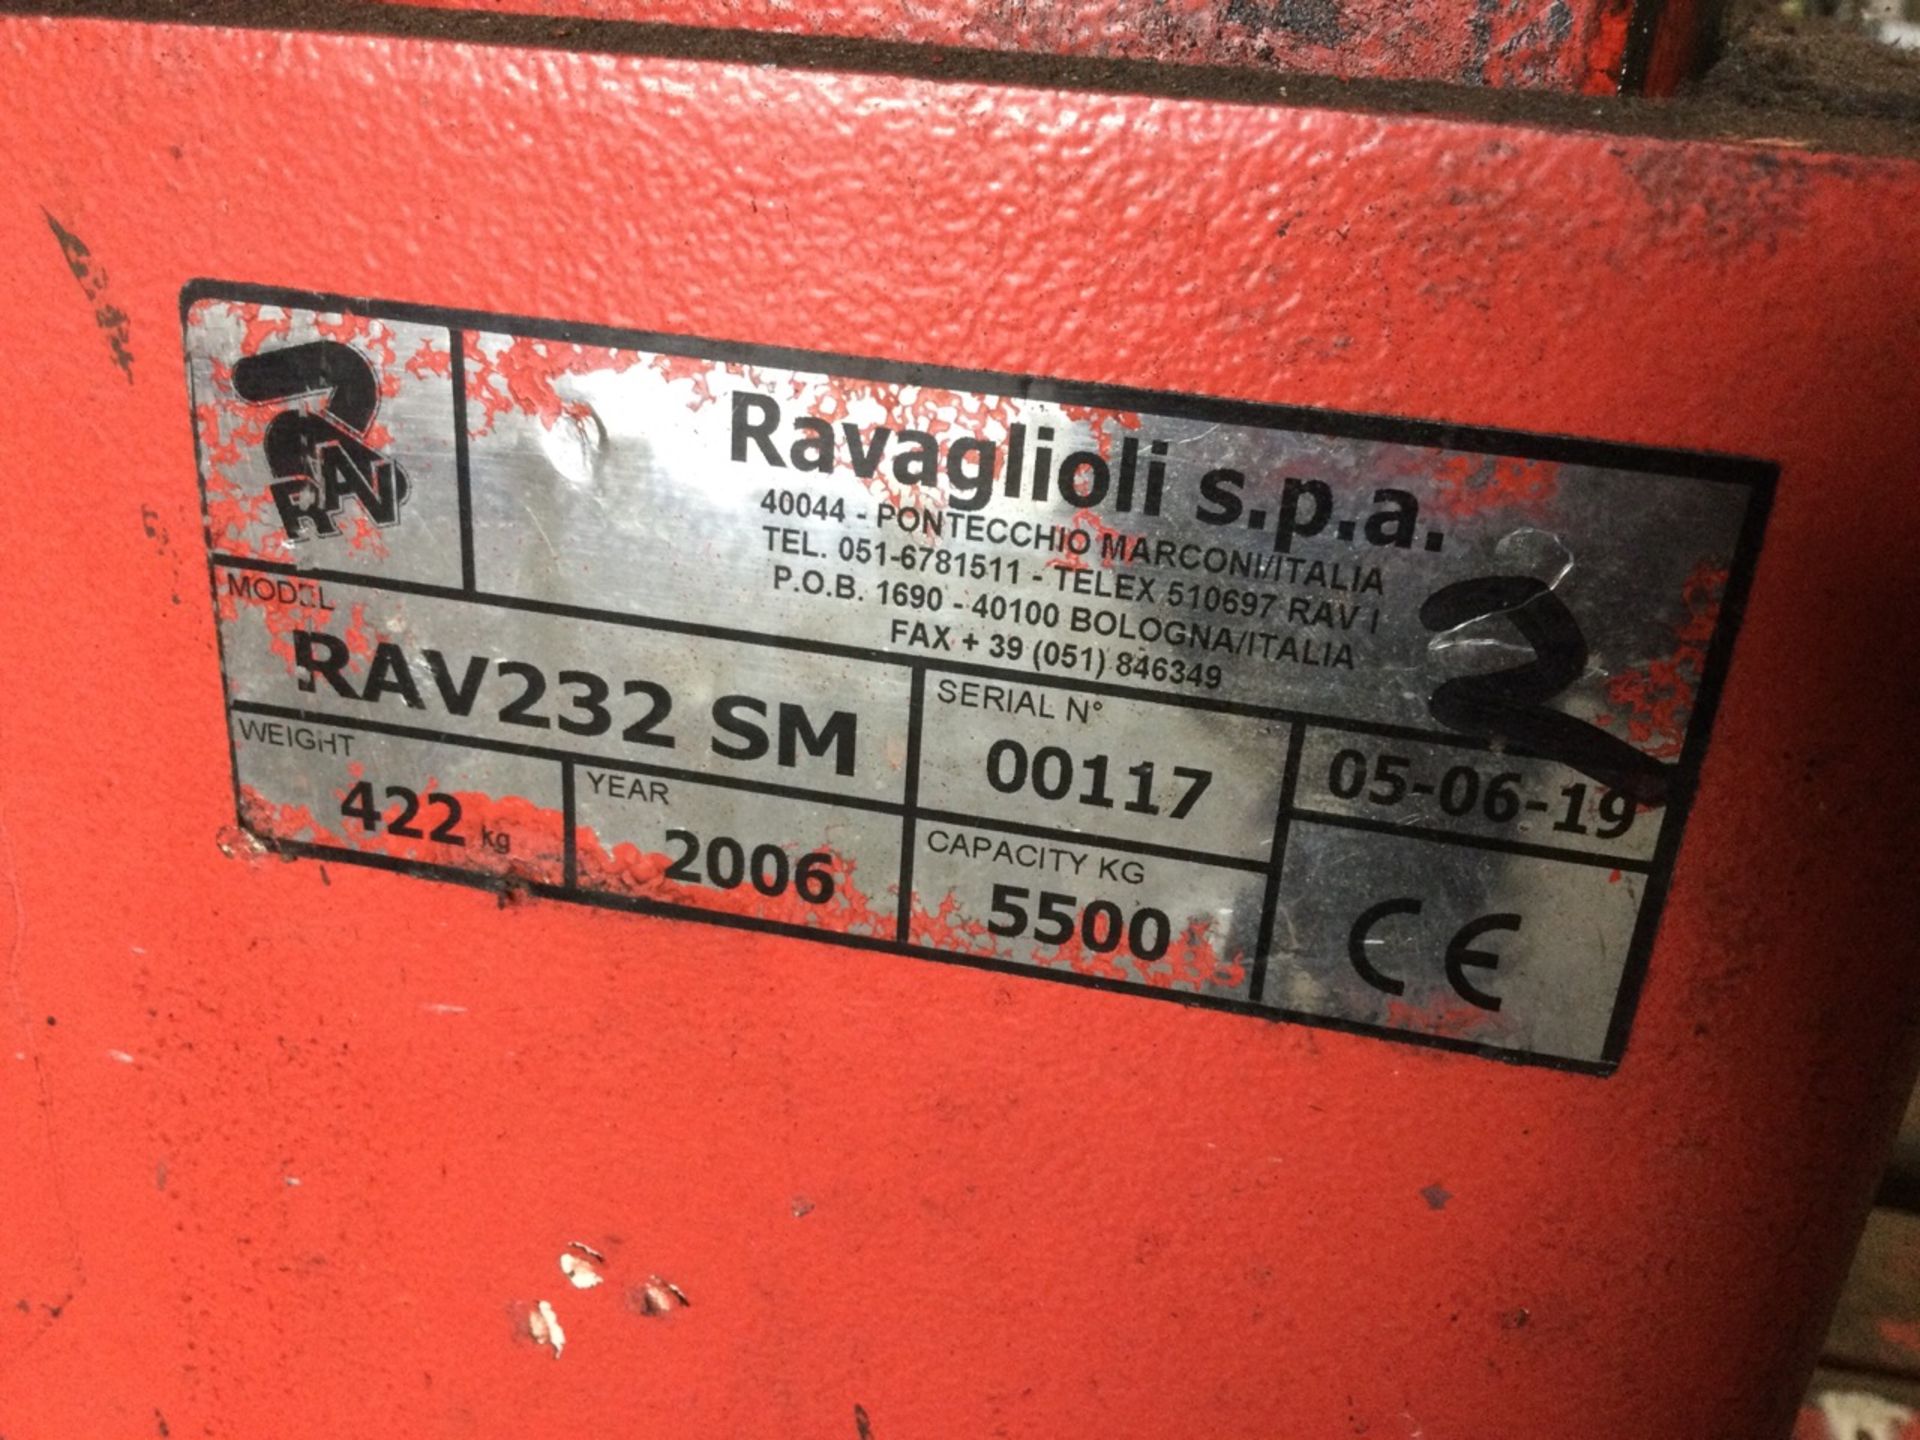 Somers/Ravaglioli RAV232 SM Mobile Cable Connected Vehicle Stands, Each 5500kg Capacity, serial numb - Bild 3 aus 6